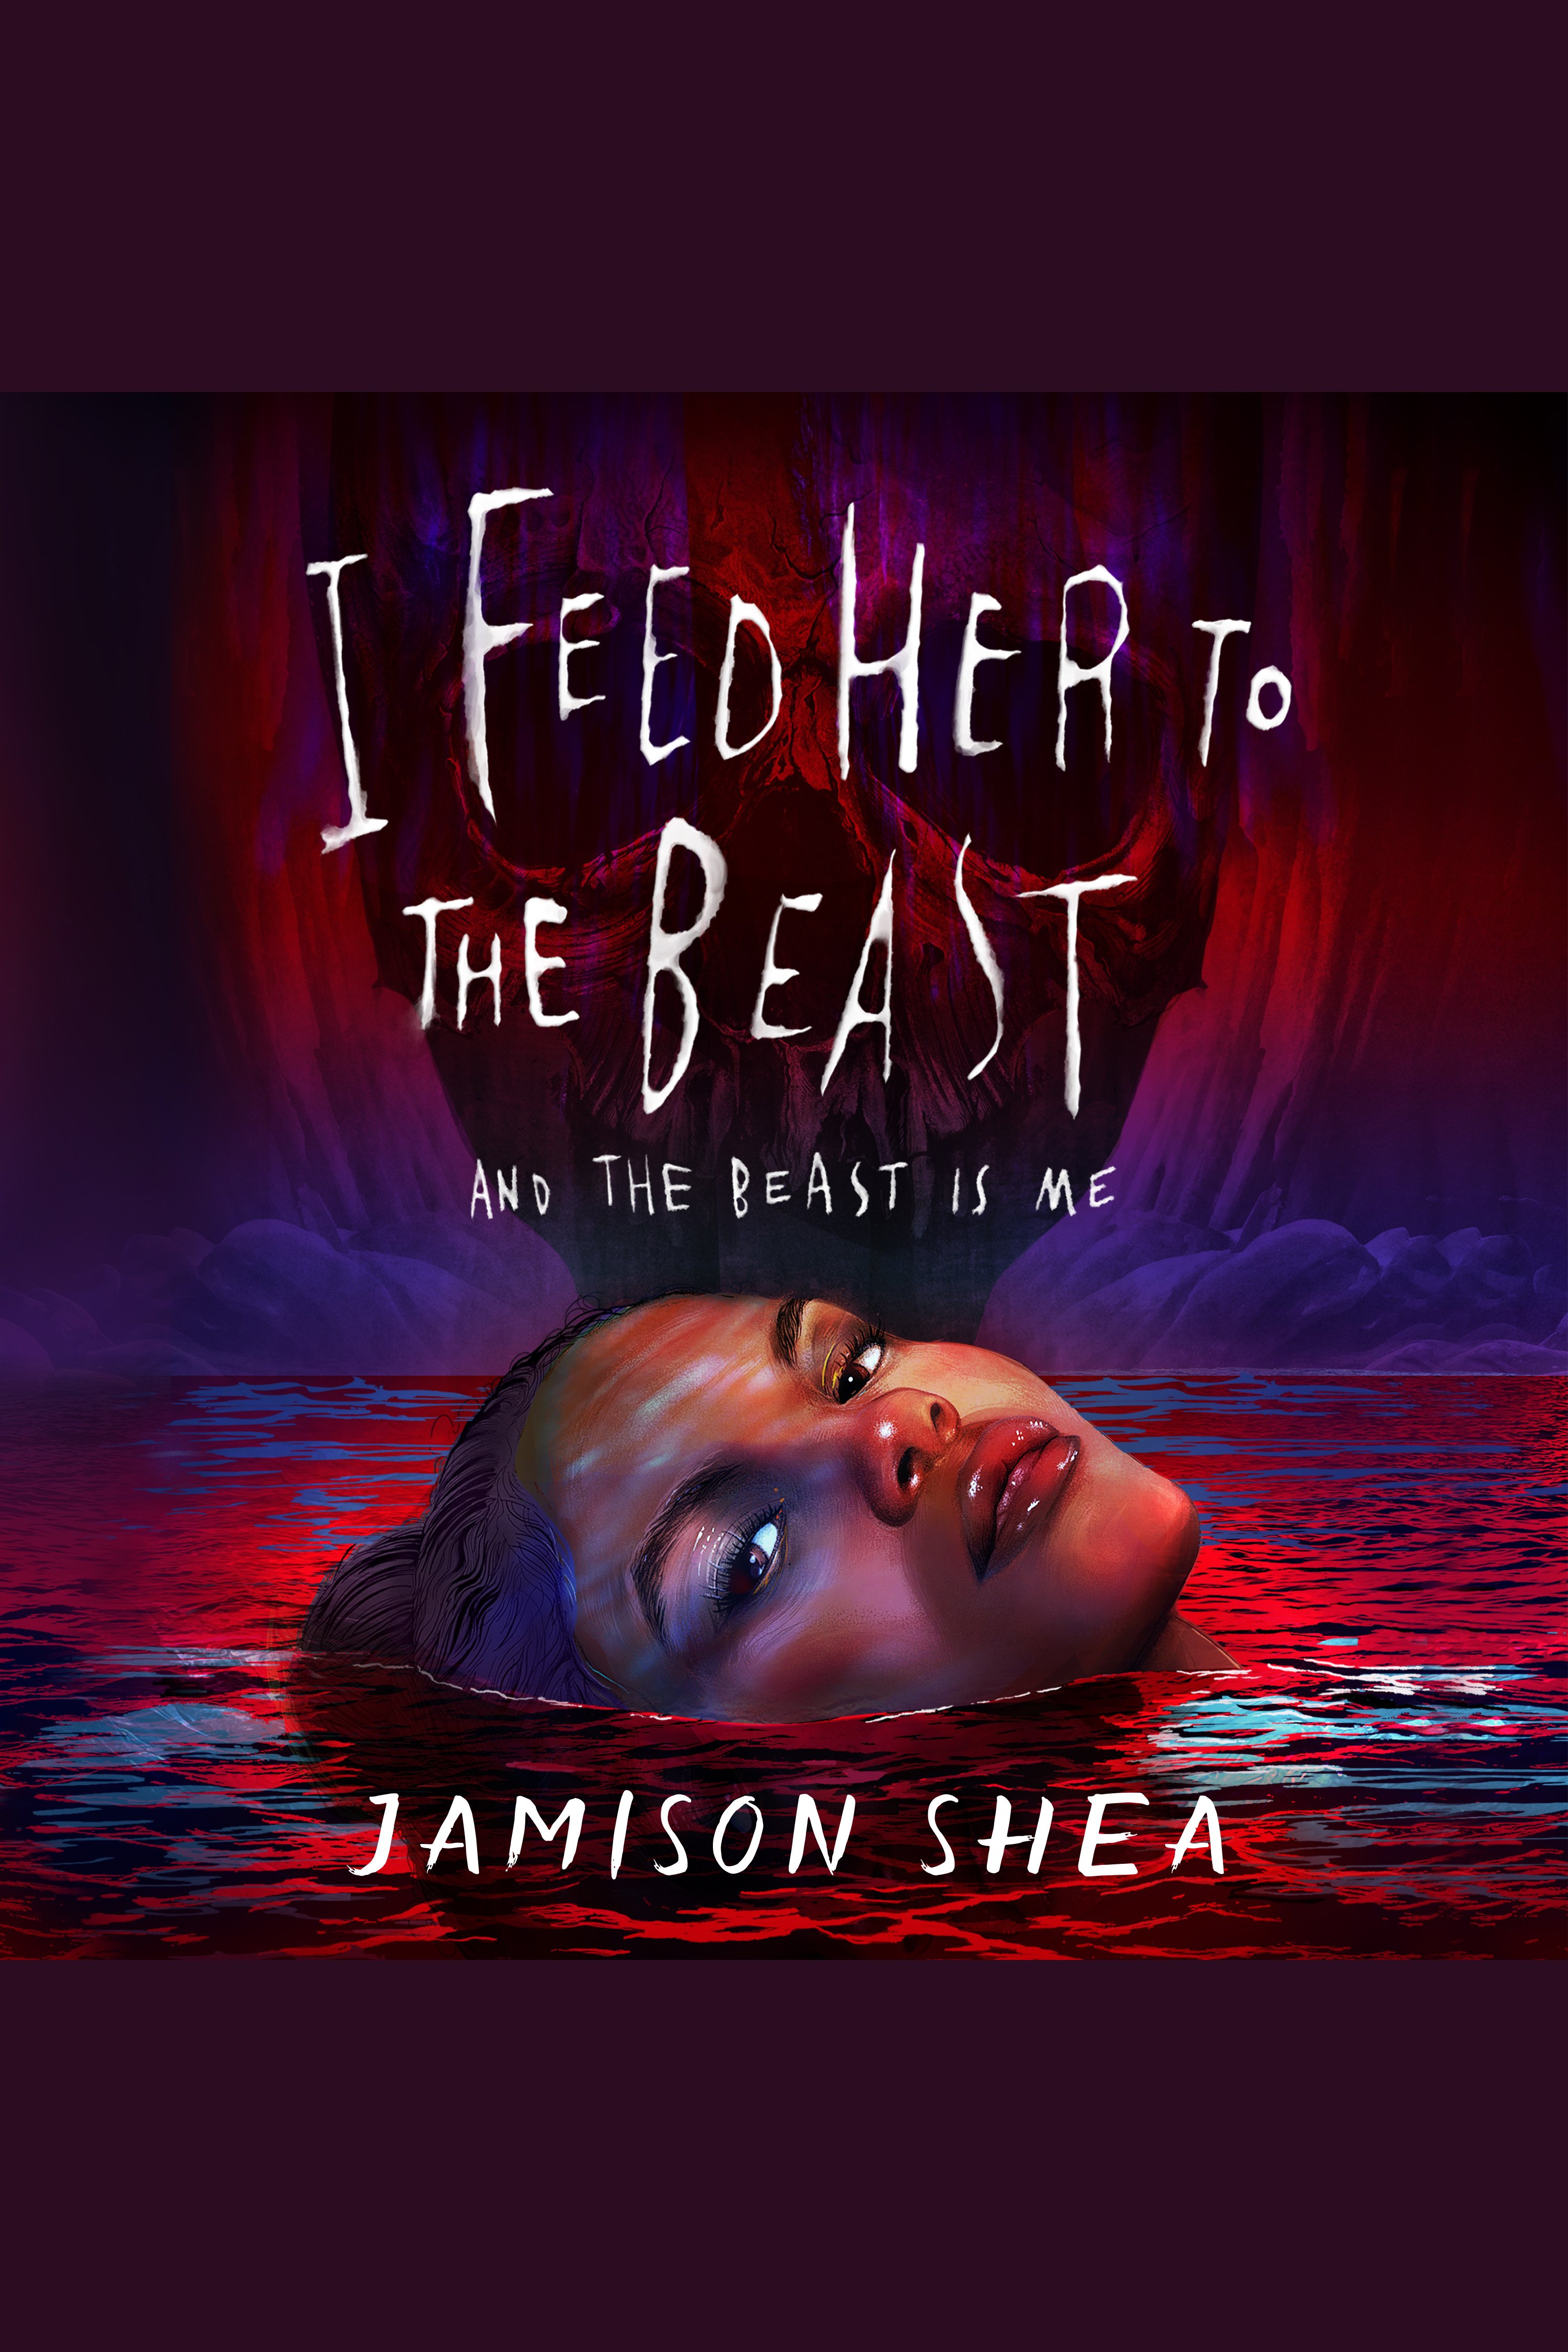 I Feed Her to the Beast and the Beast Is Me cover image